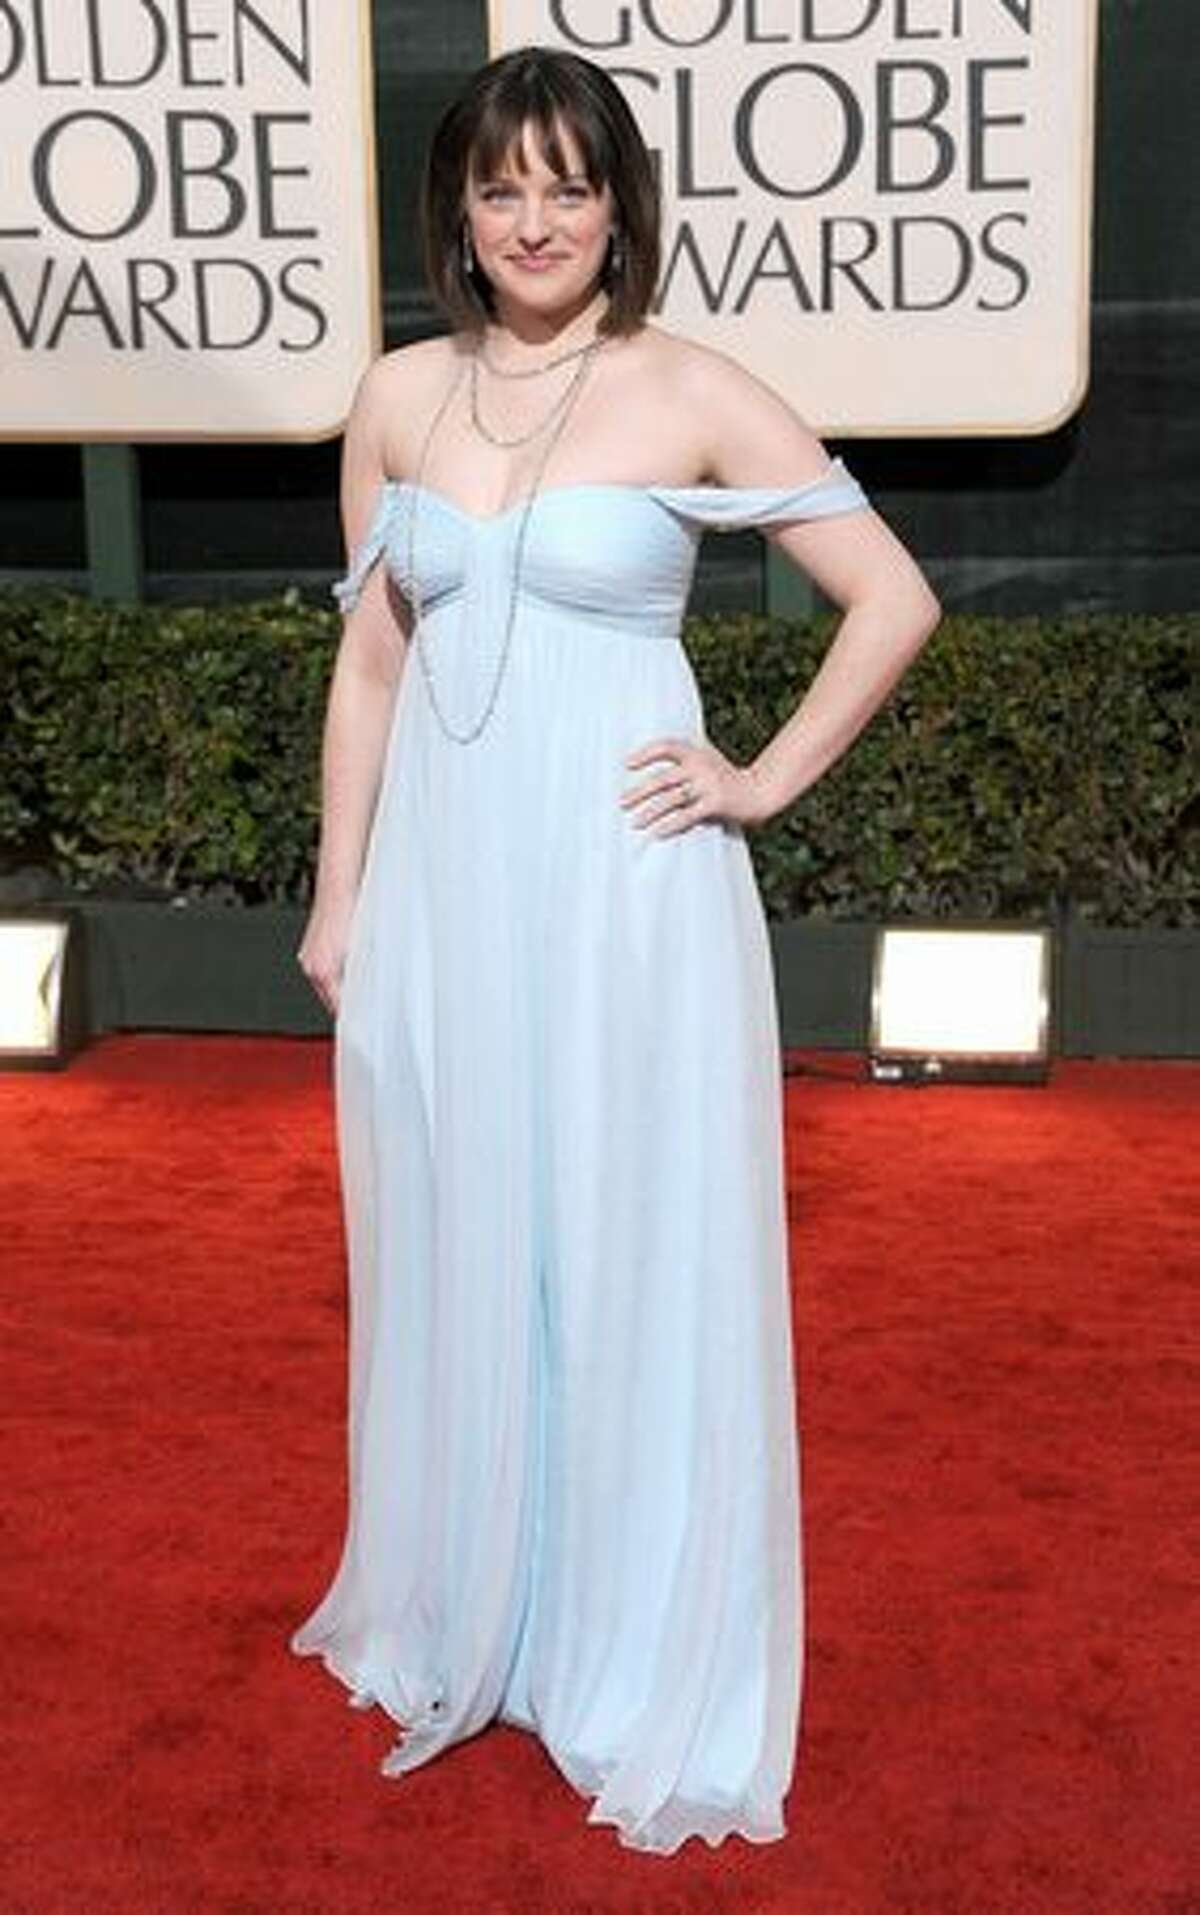 We love Elisabeth Moss as Peggy on "Mad Men" but even she might know better than to wear this gown which does not compliment her body and makes her look dumpy and washed-out.